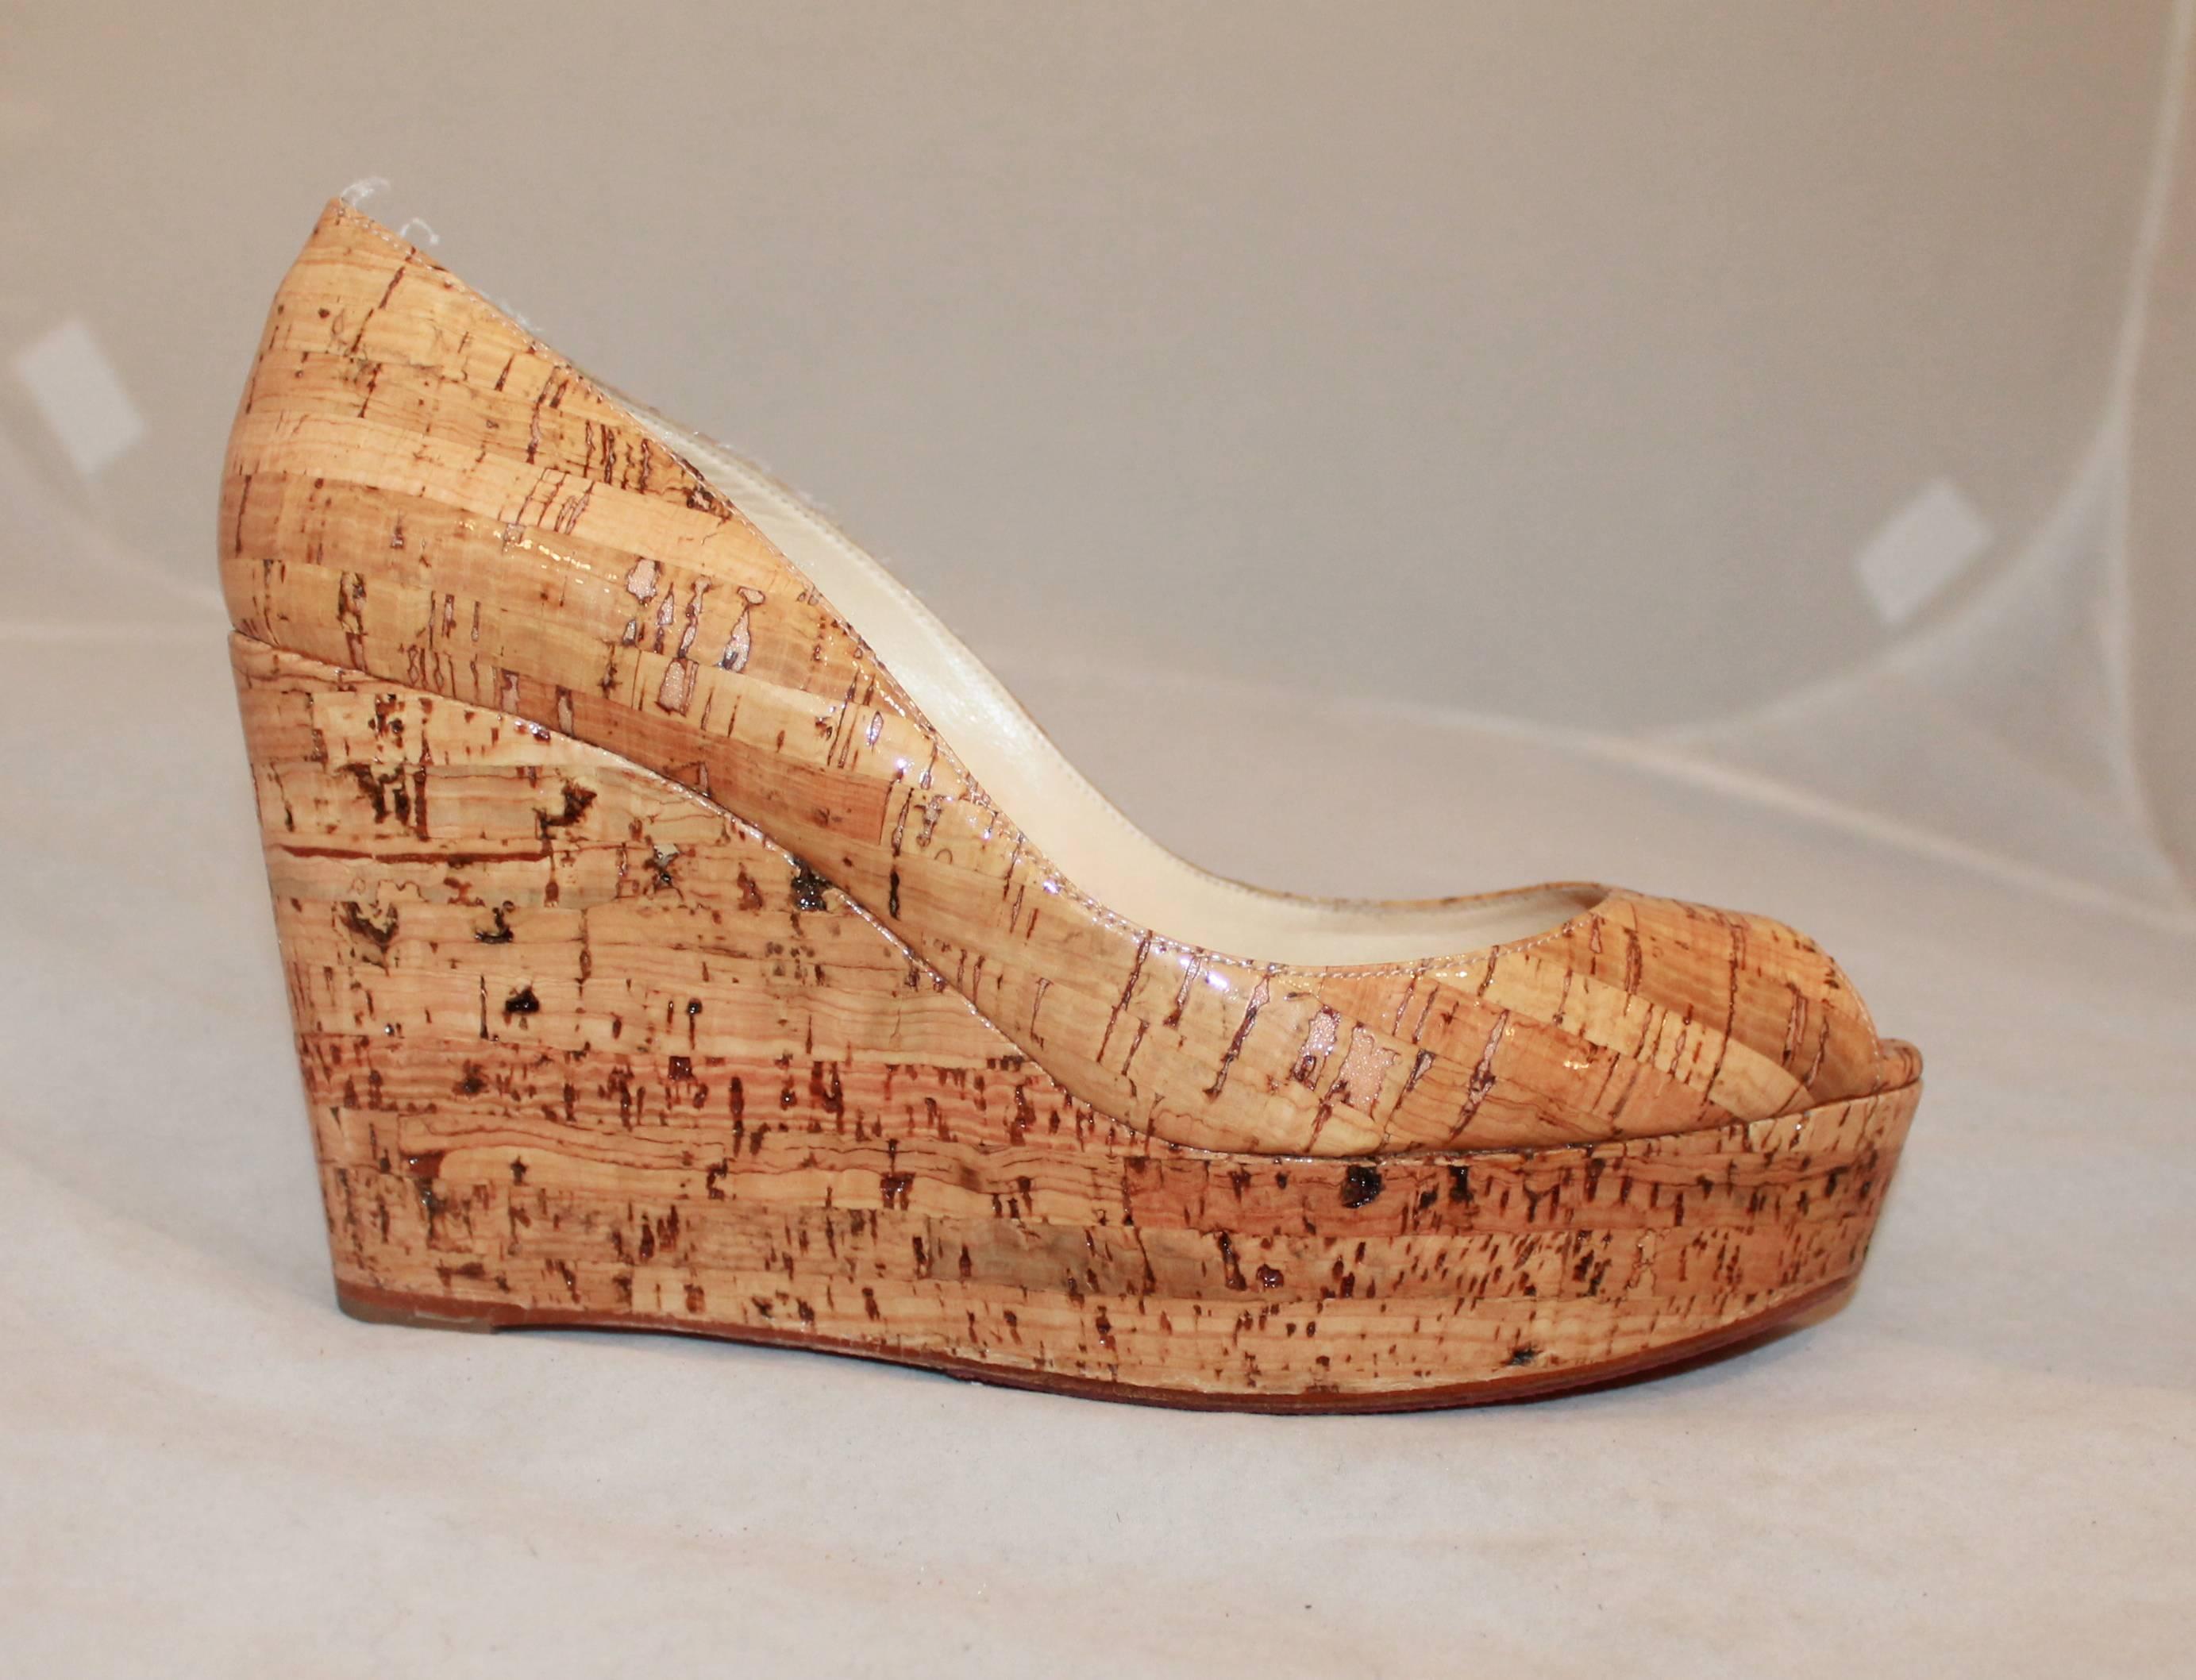 Louboutin Glossy Cork Peep-toe Wedges-38. These wedges are very nice for the summertime and are in excellent condition with a re-done bottom.

Measurements:
Platform- 1.25